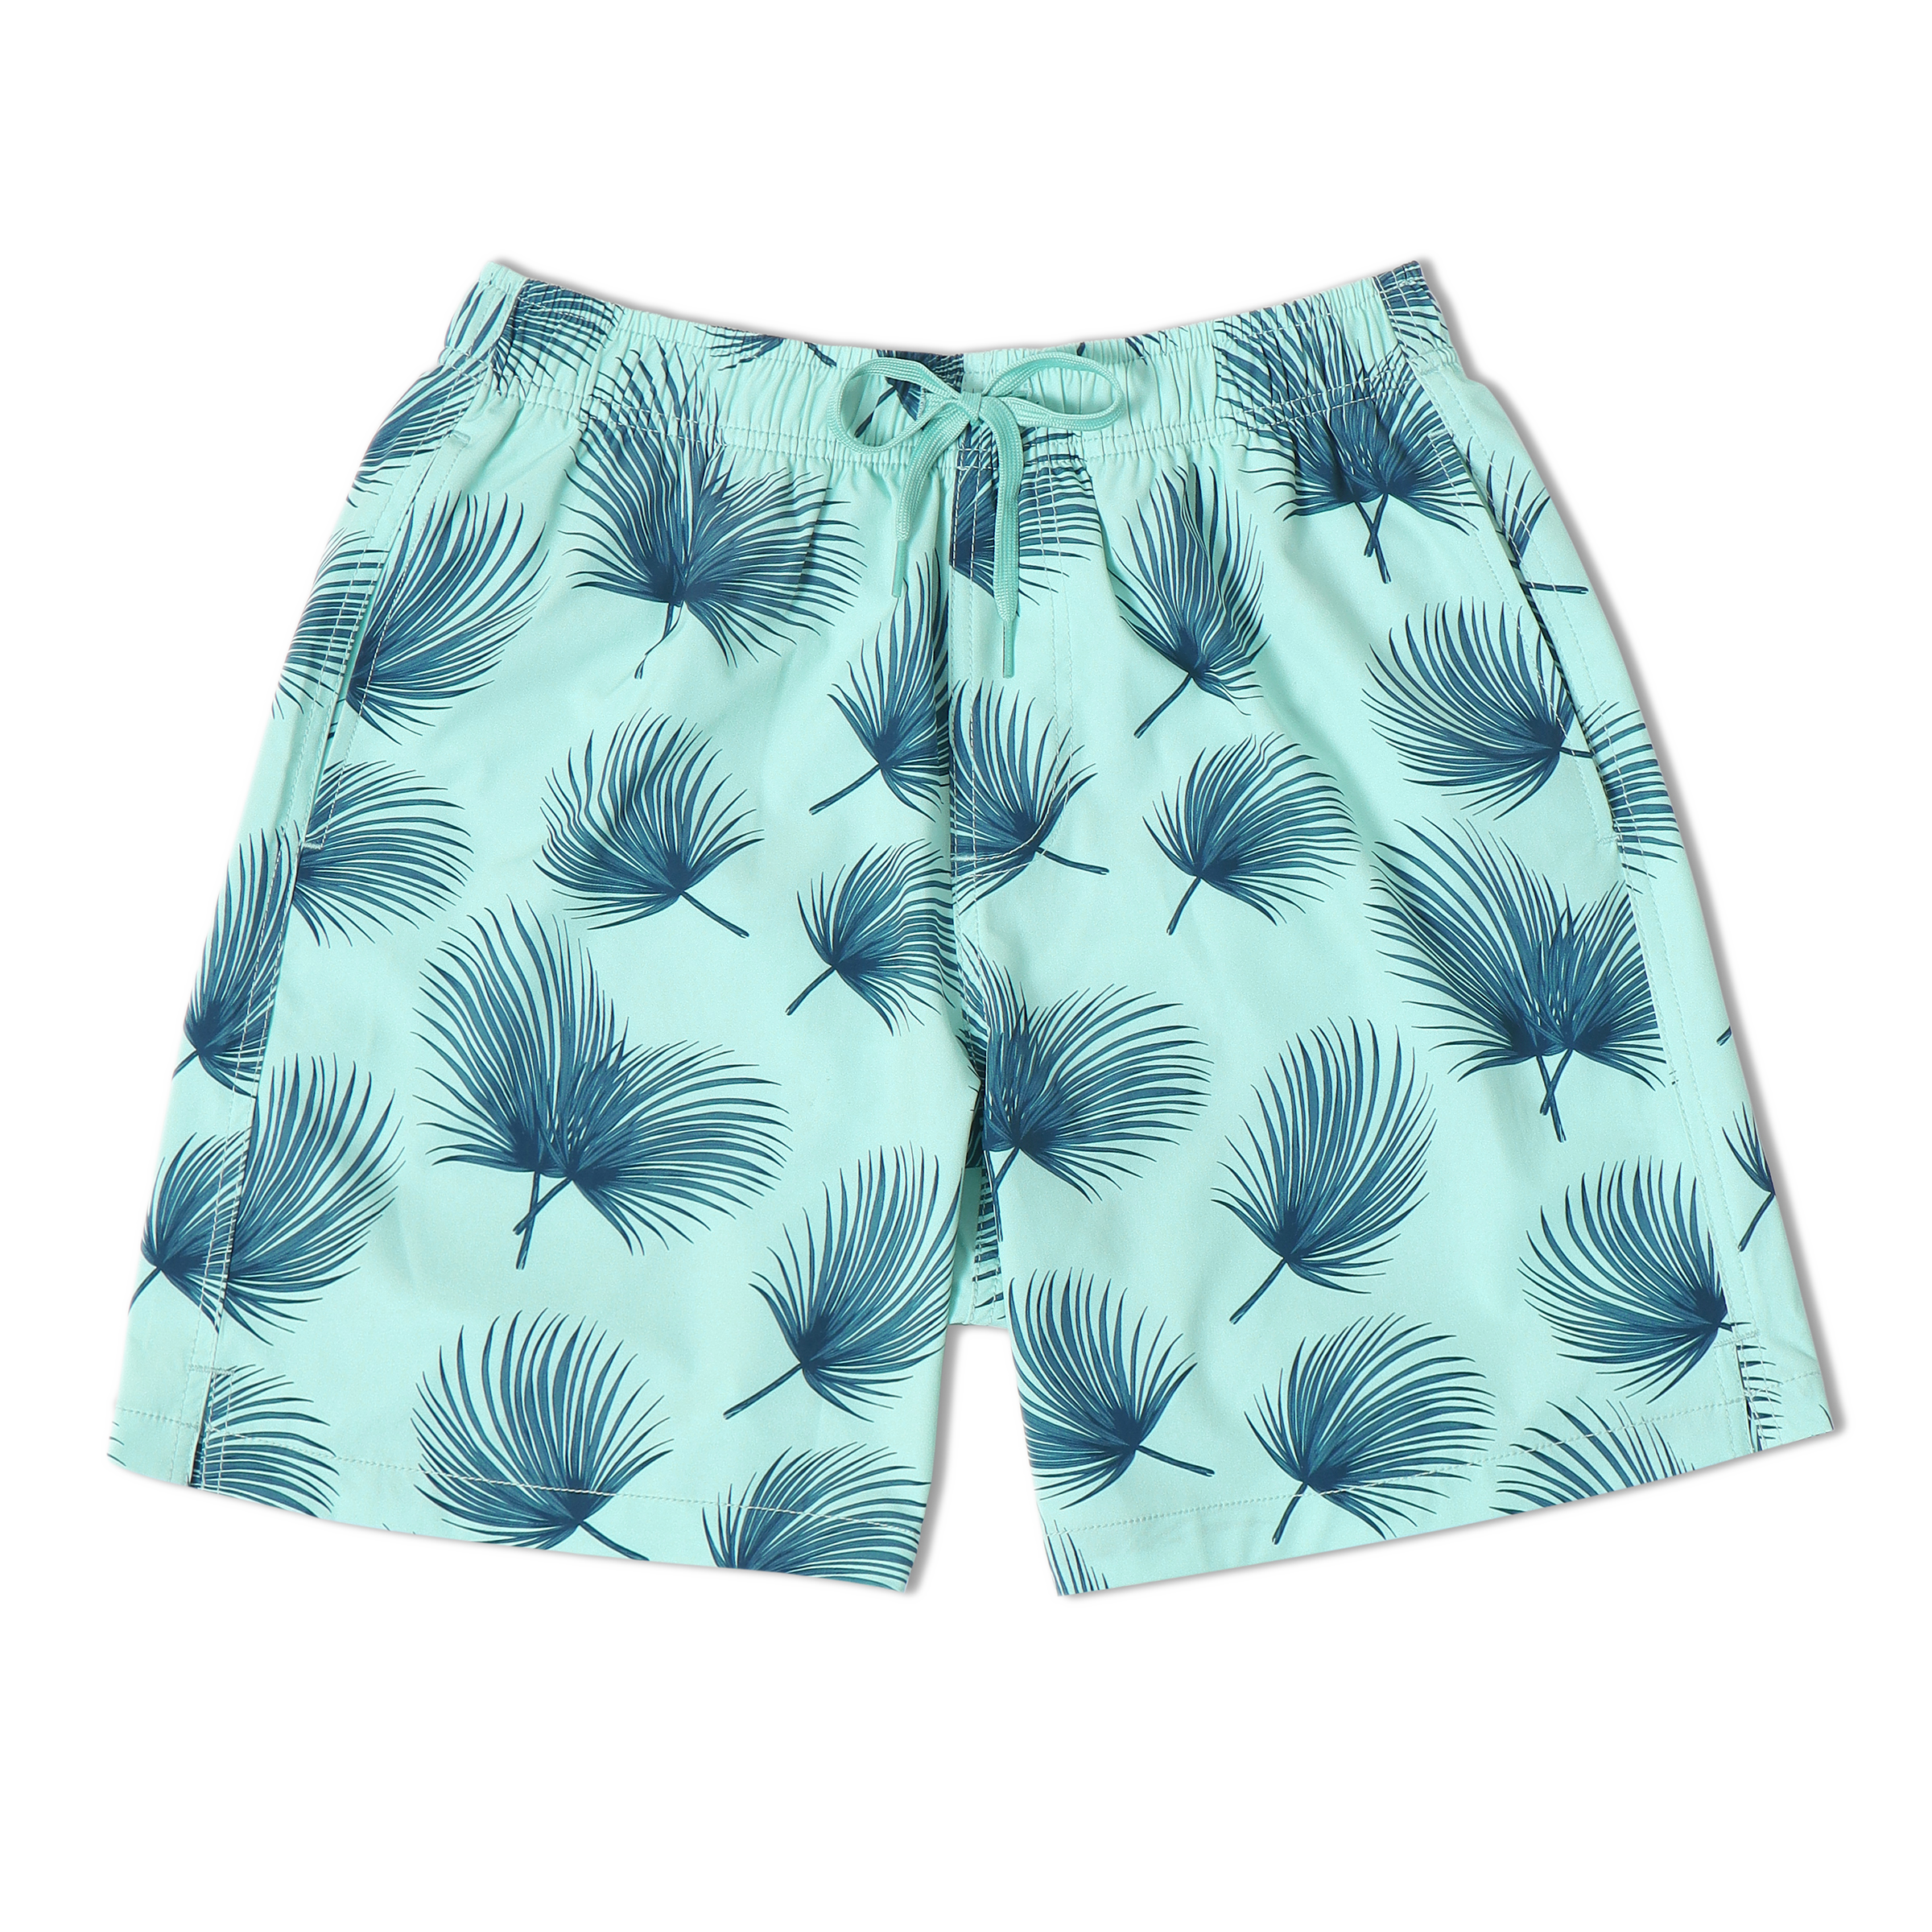 Stretch Swim 7" Island Shade front with an elastic waistband, two inseam pockets, and a dyed-to-match drawstring